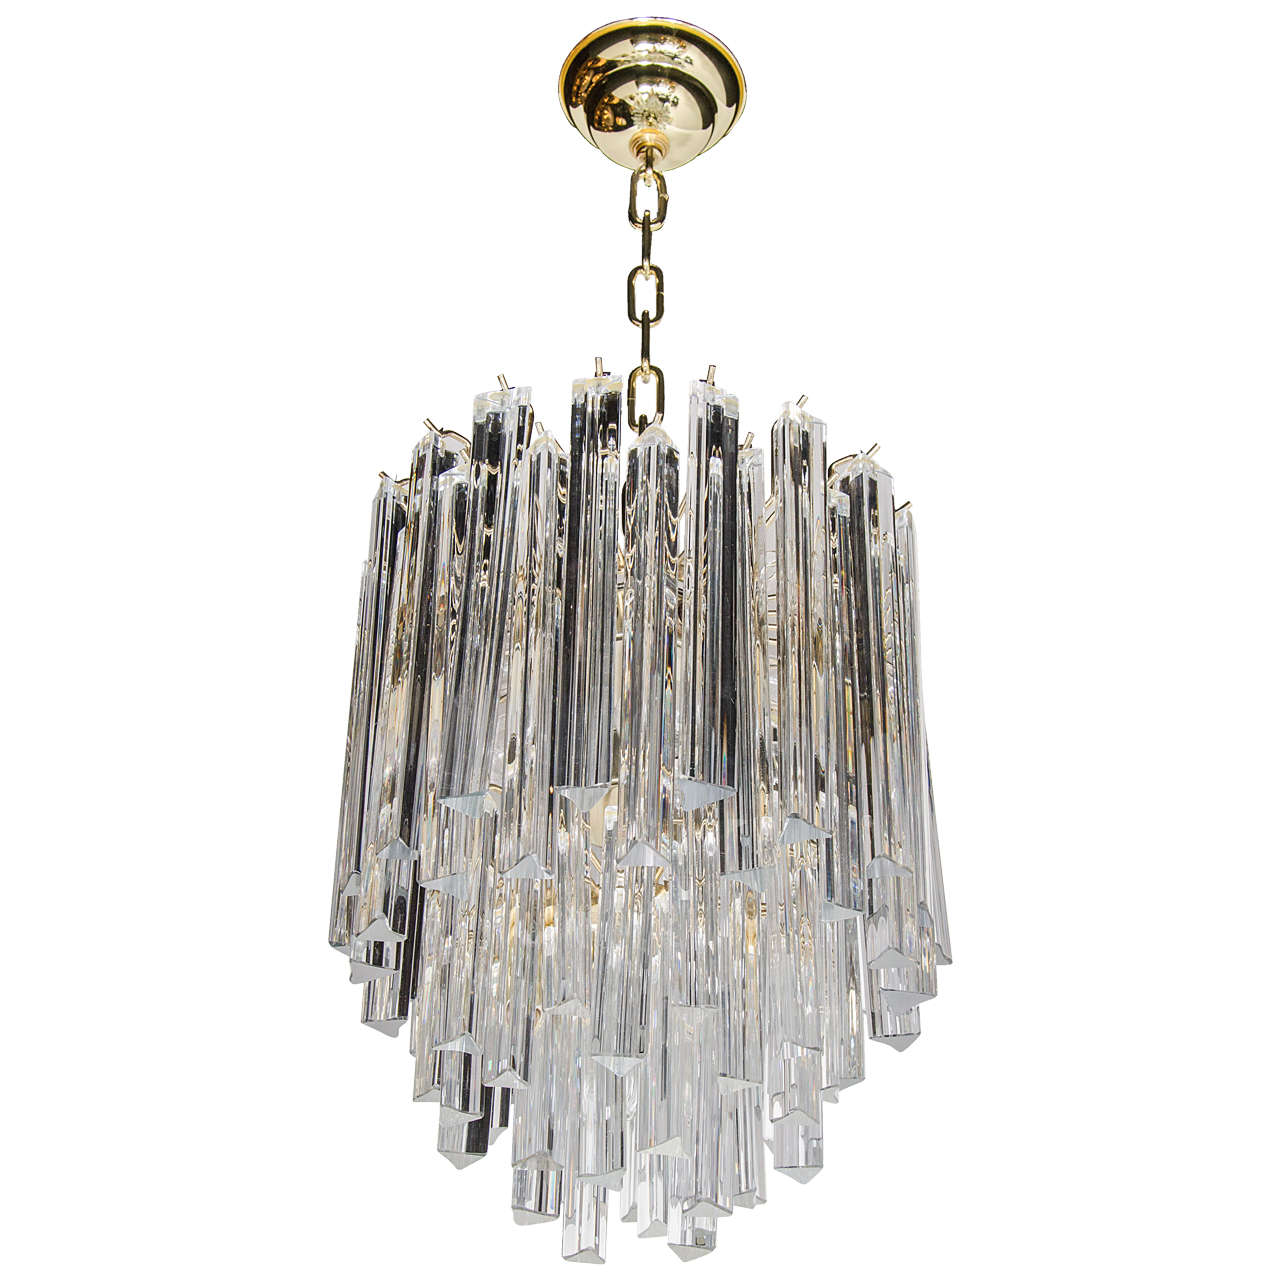 Mid-Century Modernist Cascading Camer Chandelier with Polished Brass Fittings